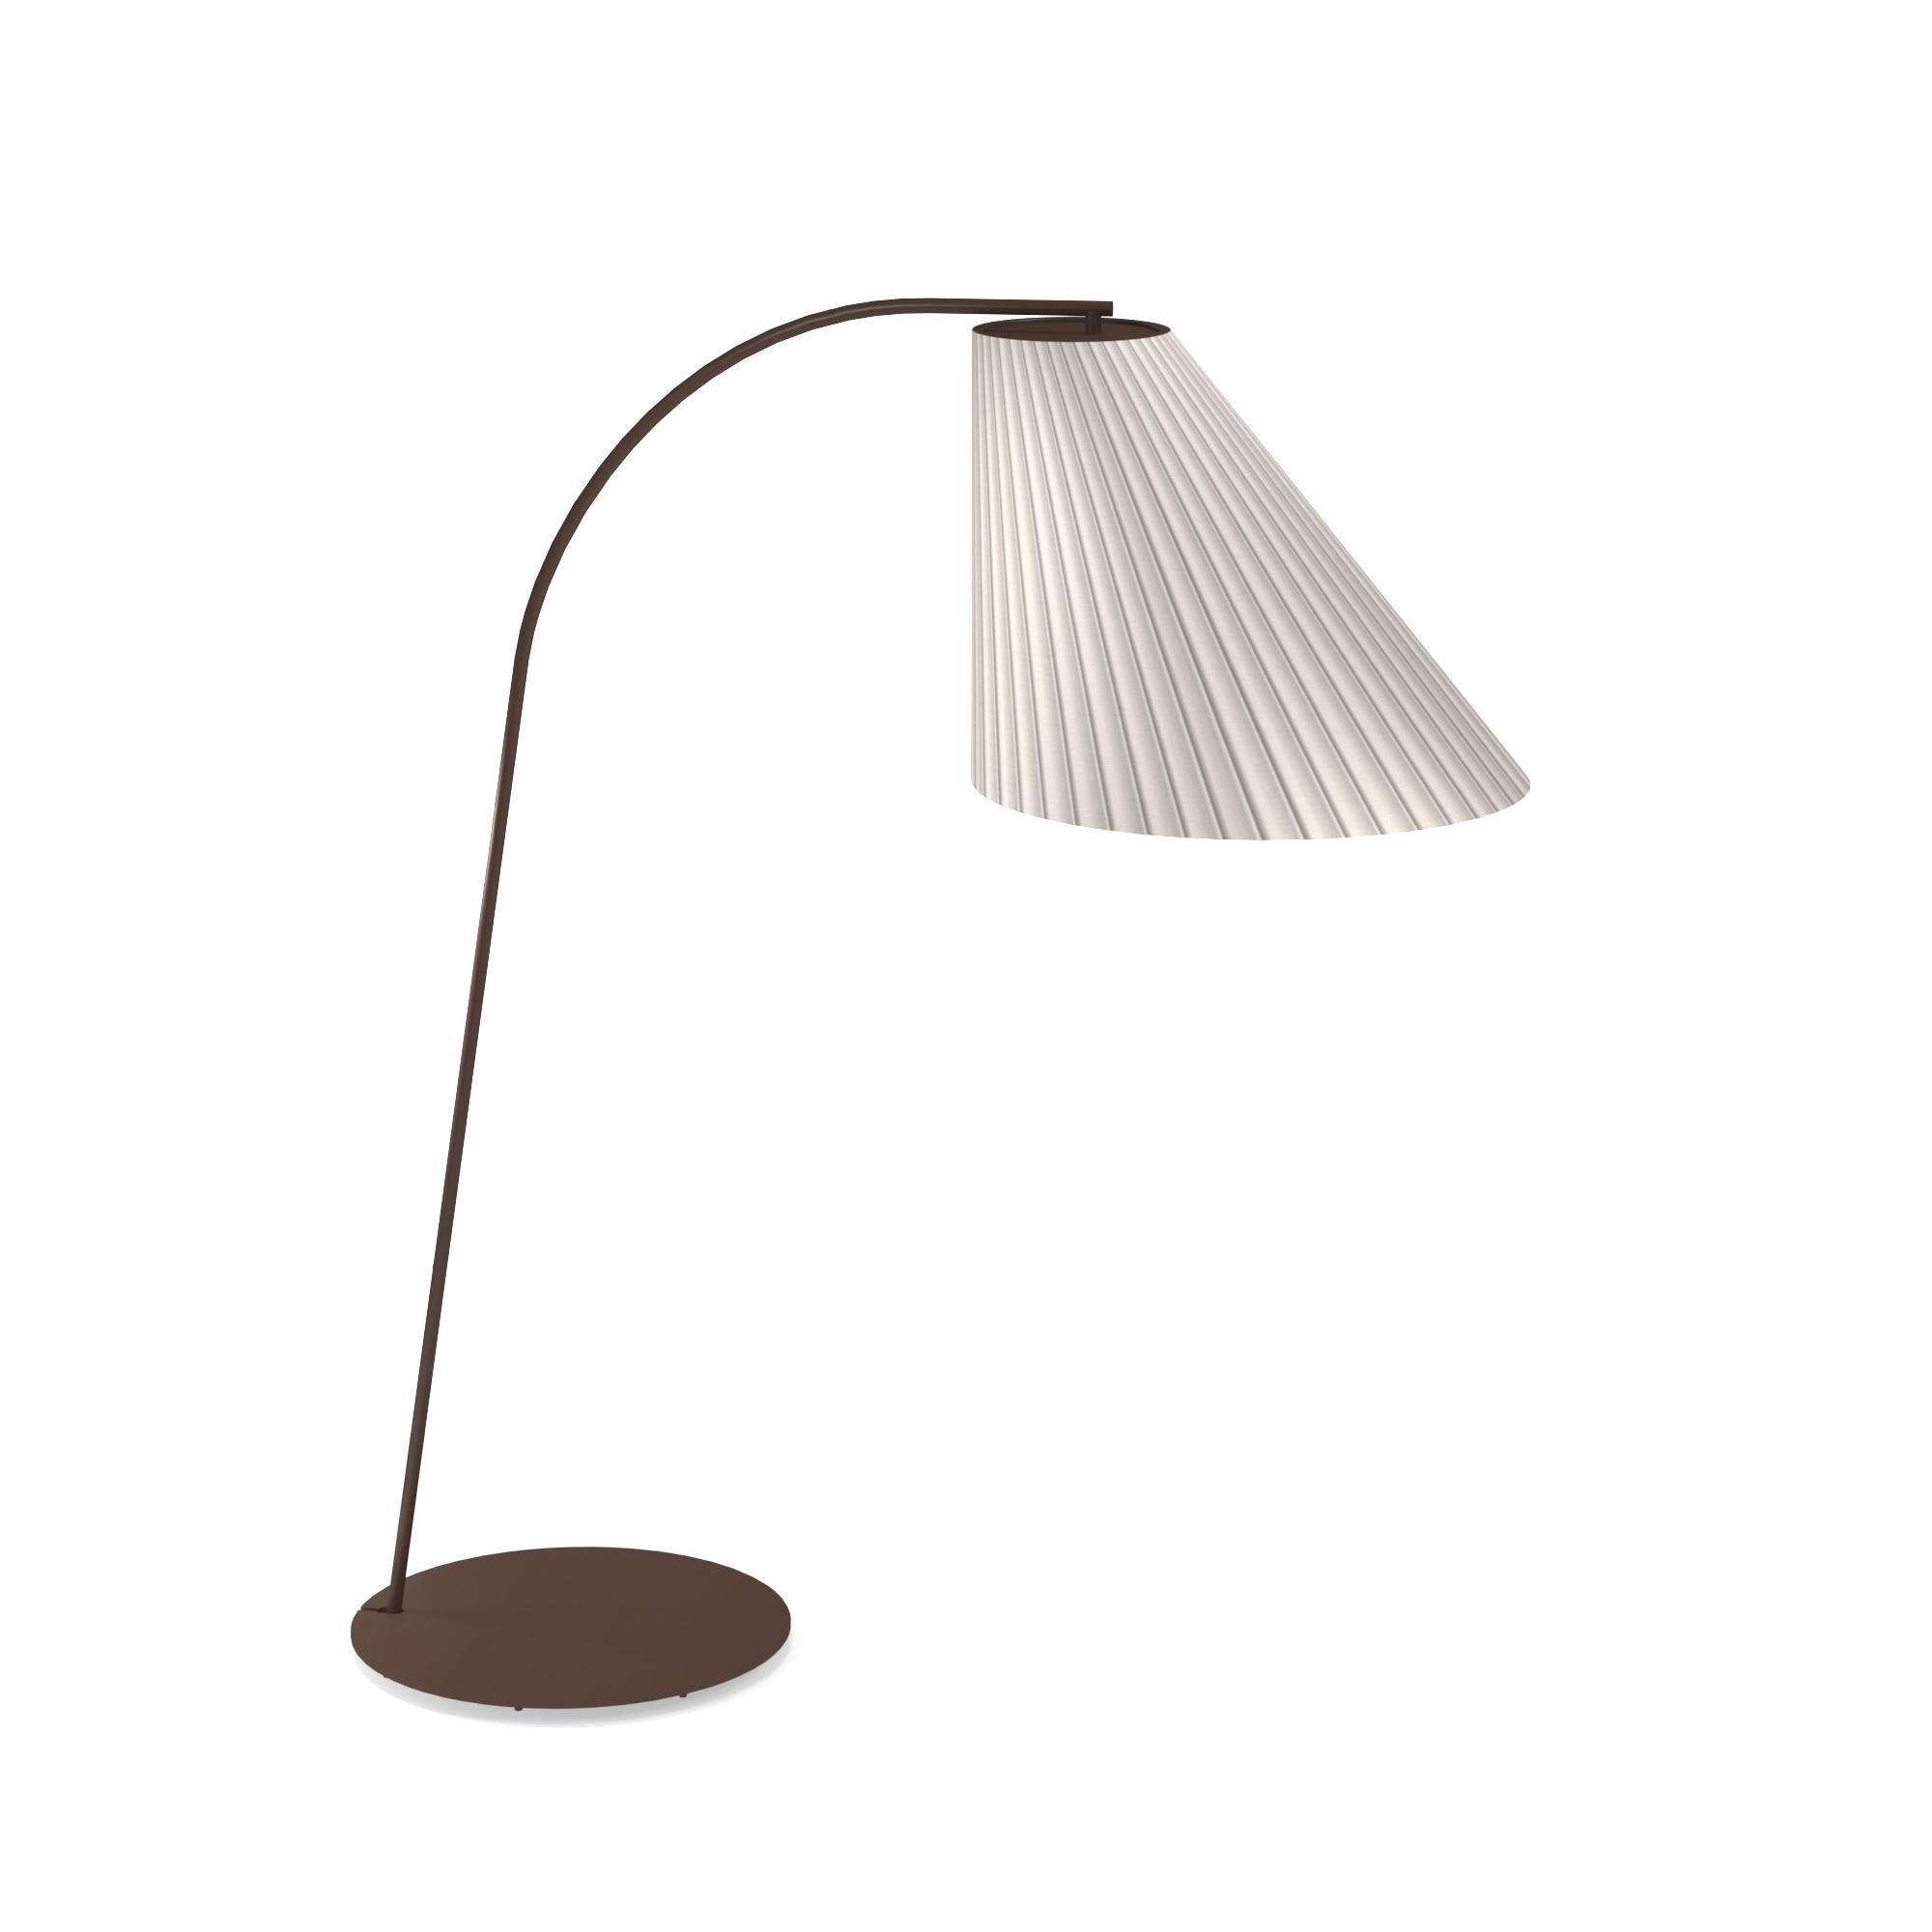 Garden Floor Lamp / Outside In Steel – Collection Cone Throughout Cone Floor Lamps (View 2 of 15)